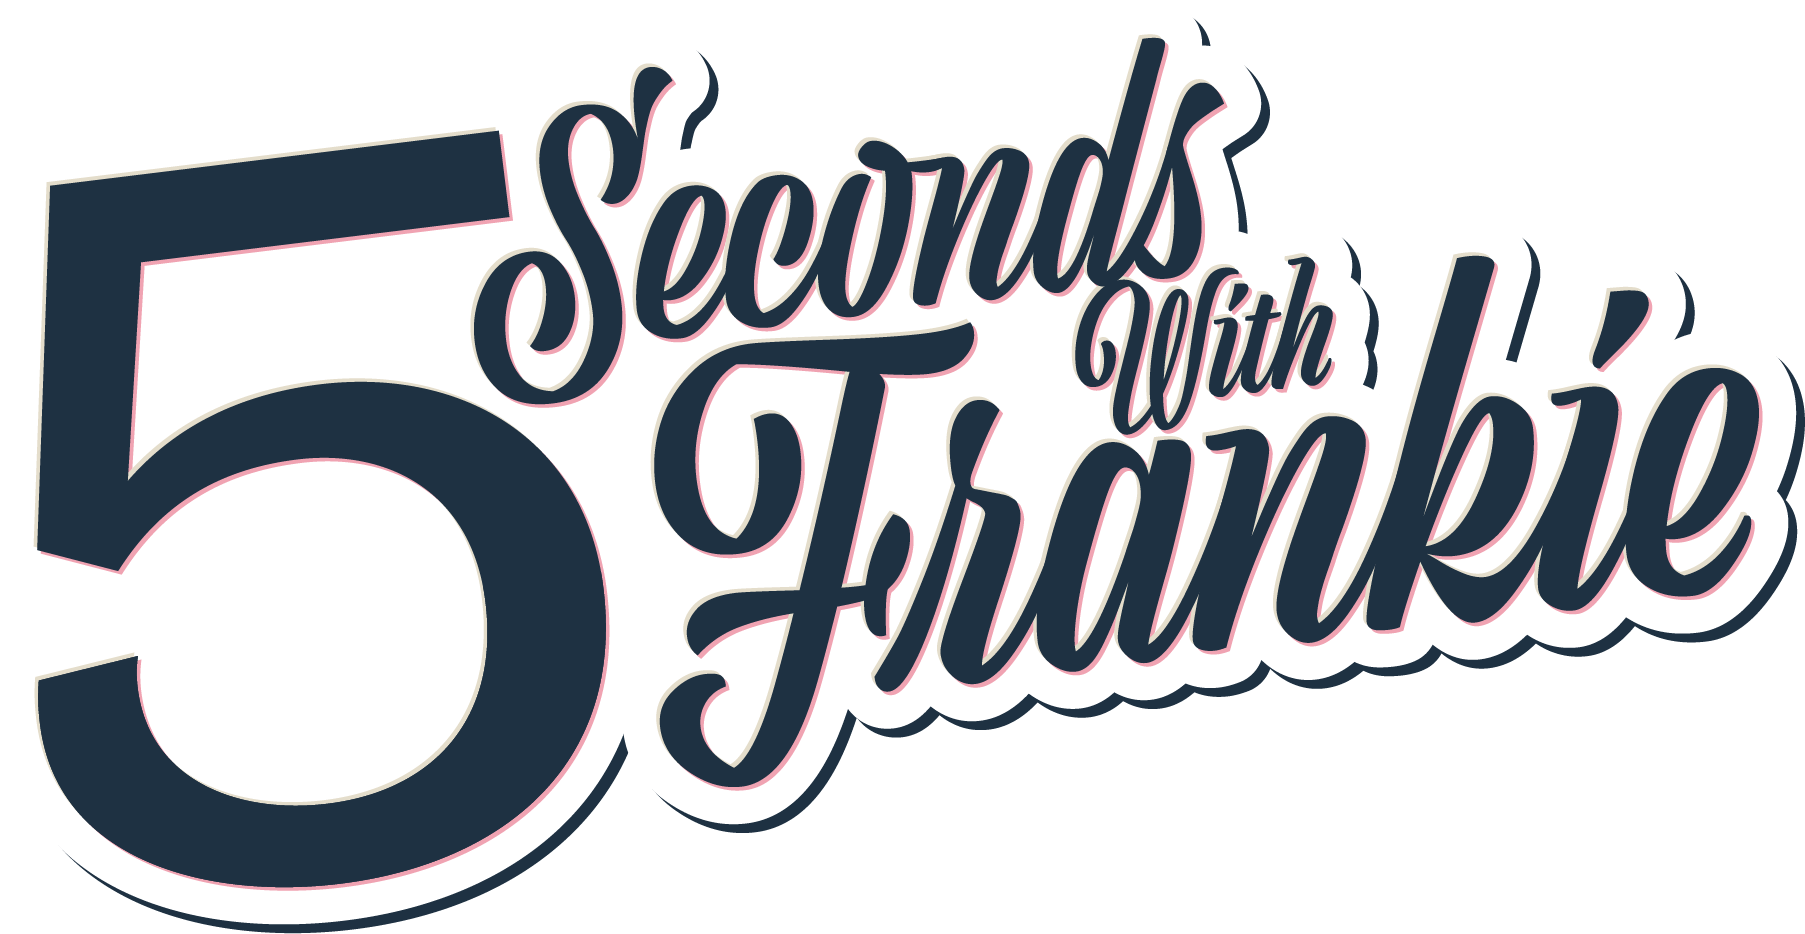 5 Seconds With Frankie